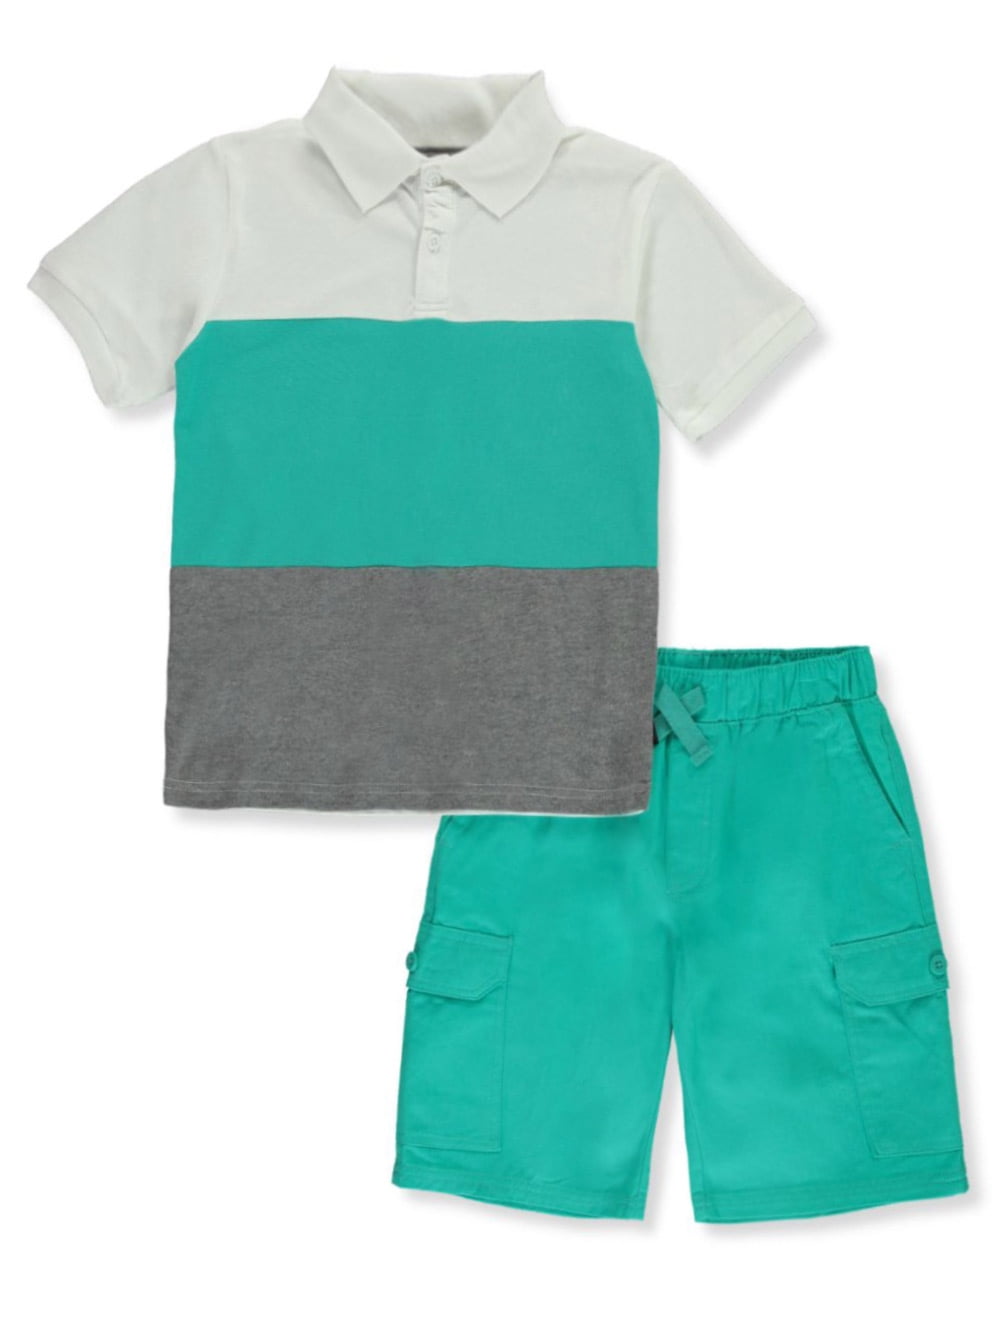 Beverly Hills Polo Club Boys Sleeve Top and Short Set 